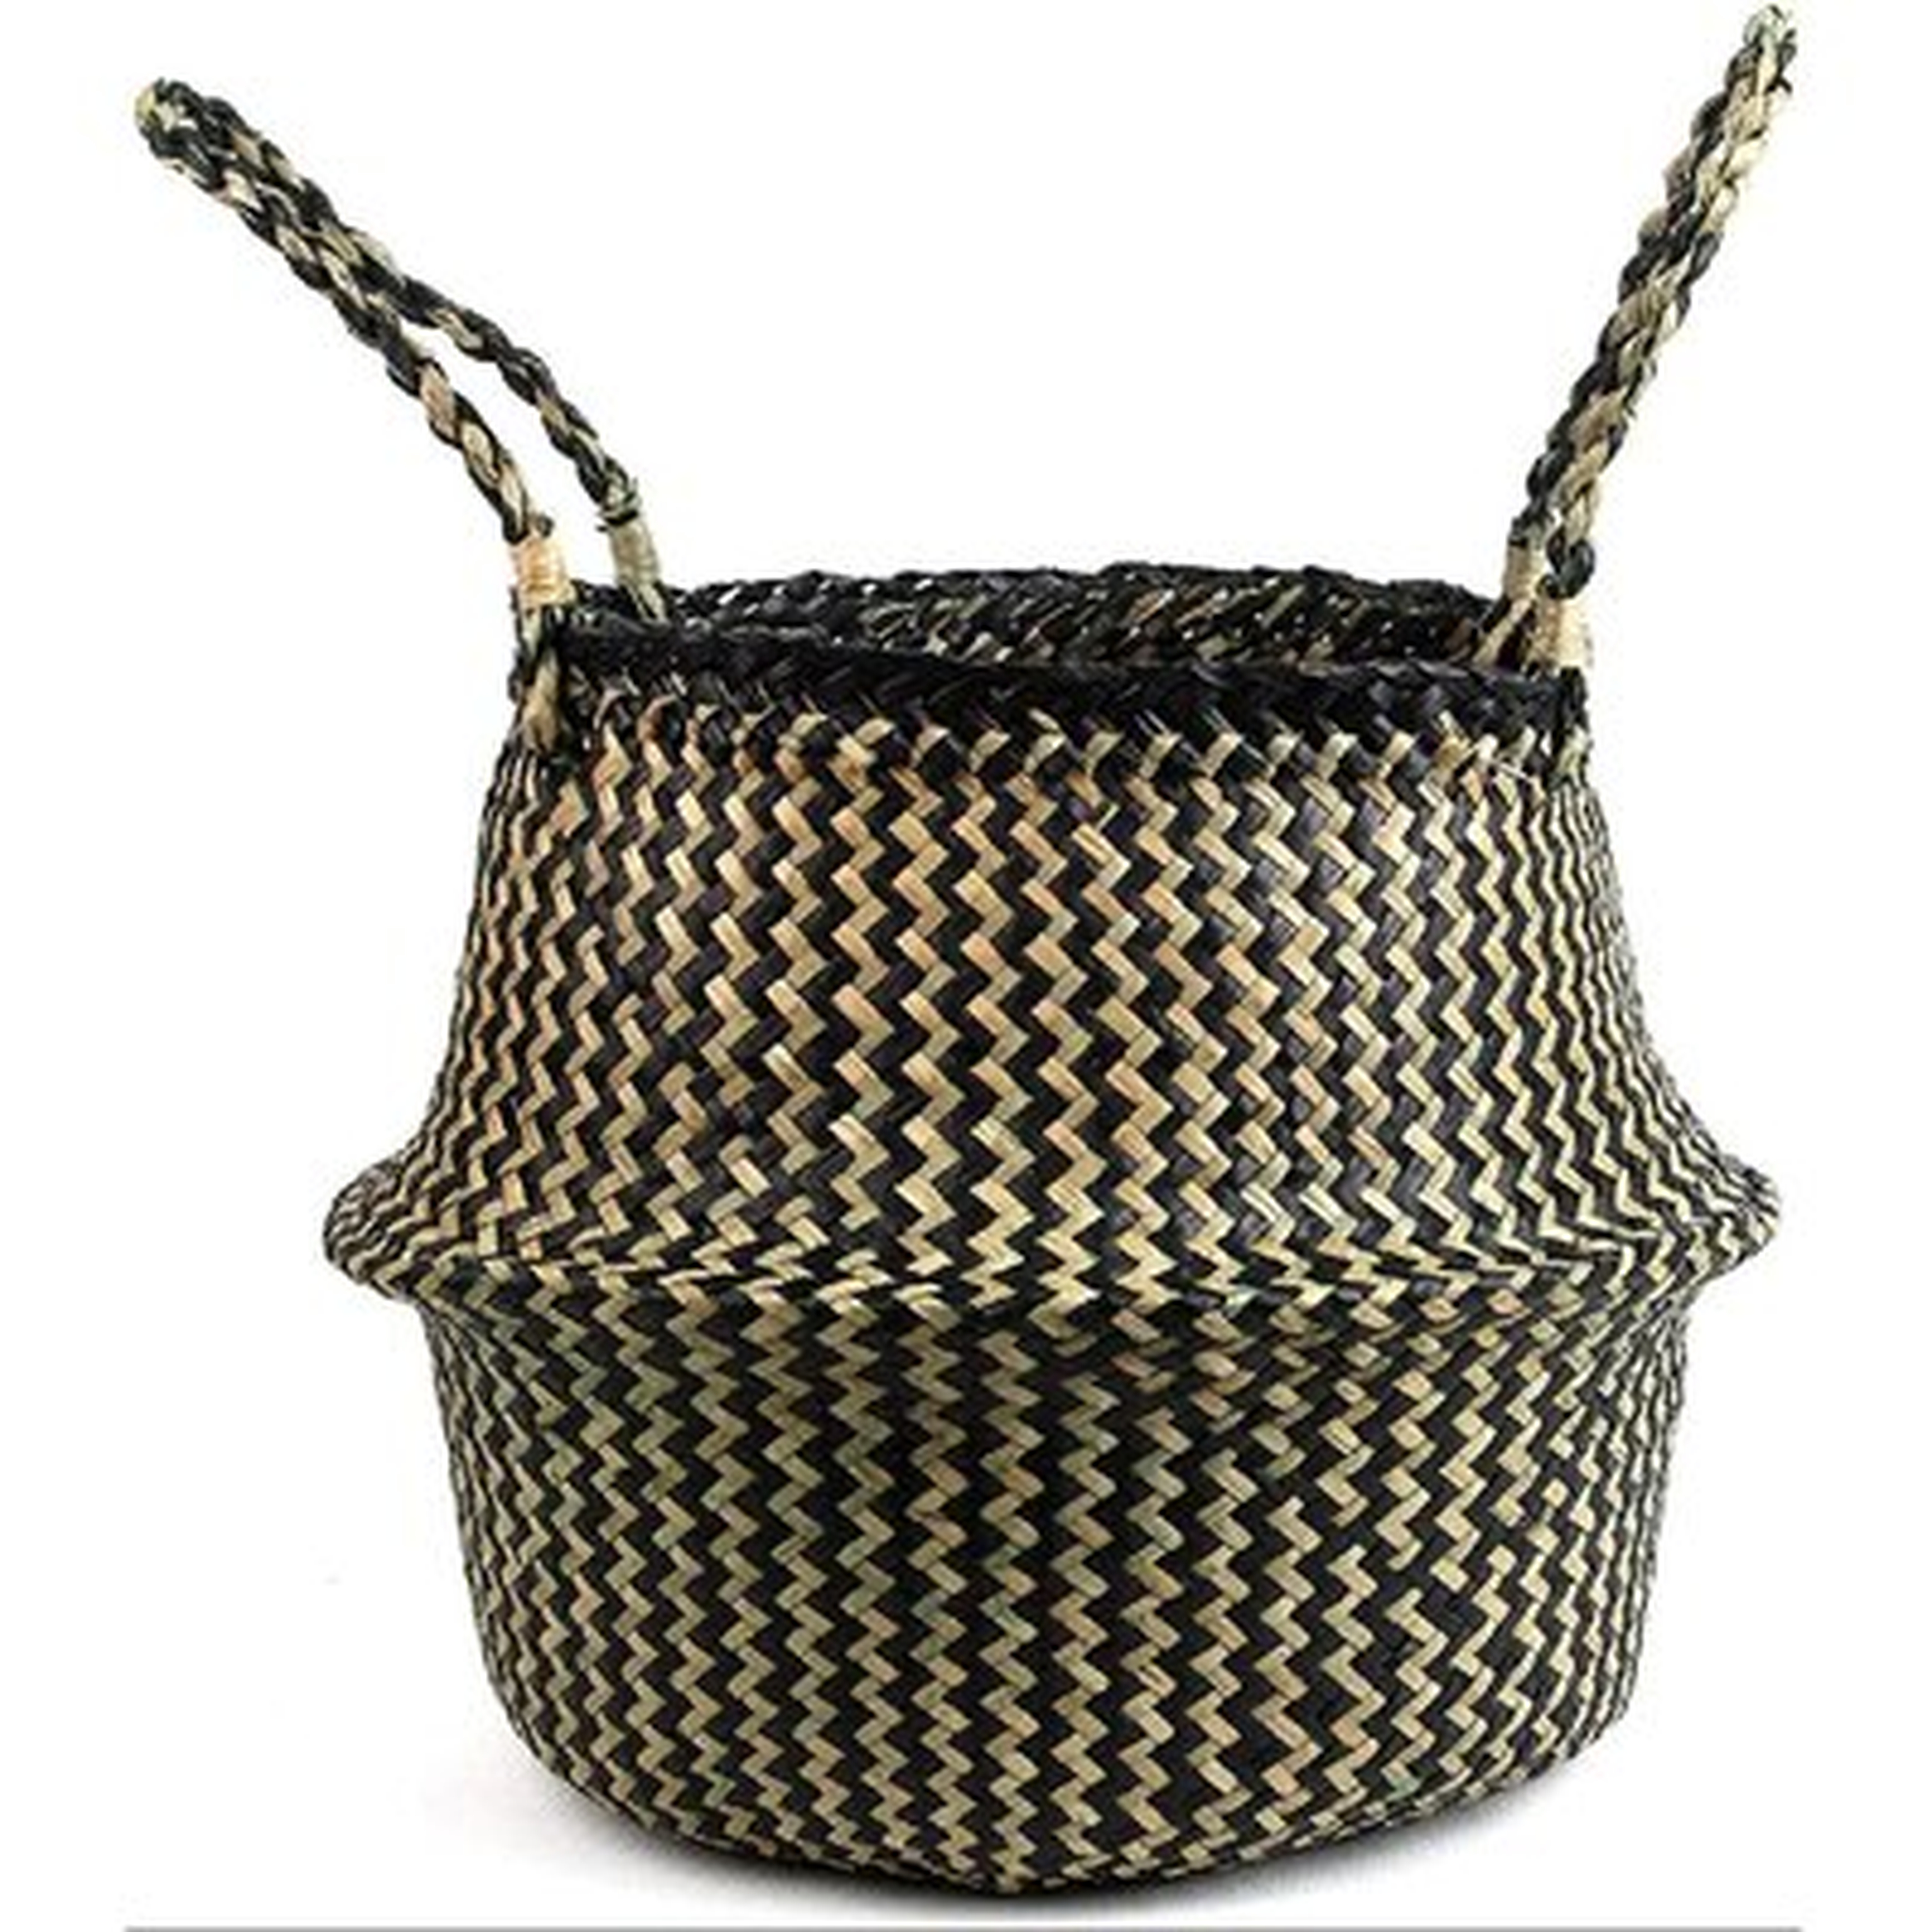 Woven Seagrass Belly Basket For Storage Plant Pot Basket And Laundry, Picnic And Grocery Basket - Wayfair